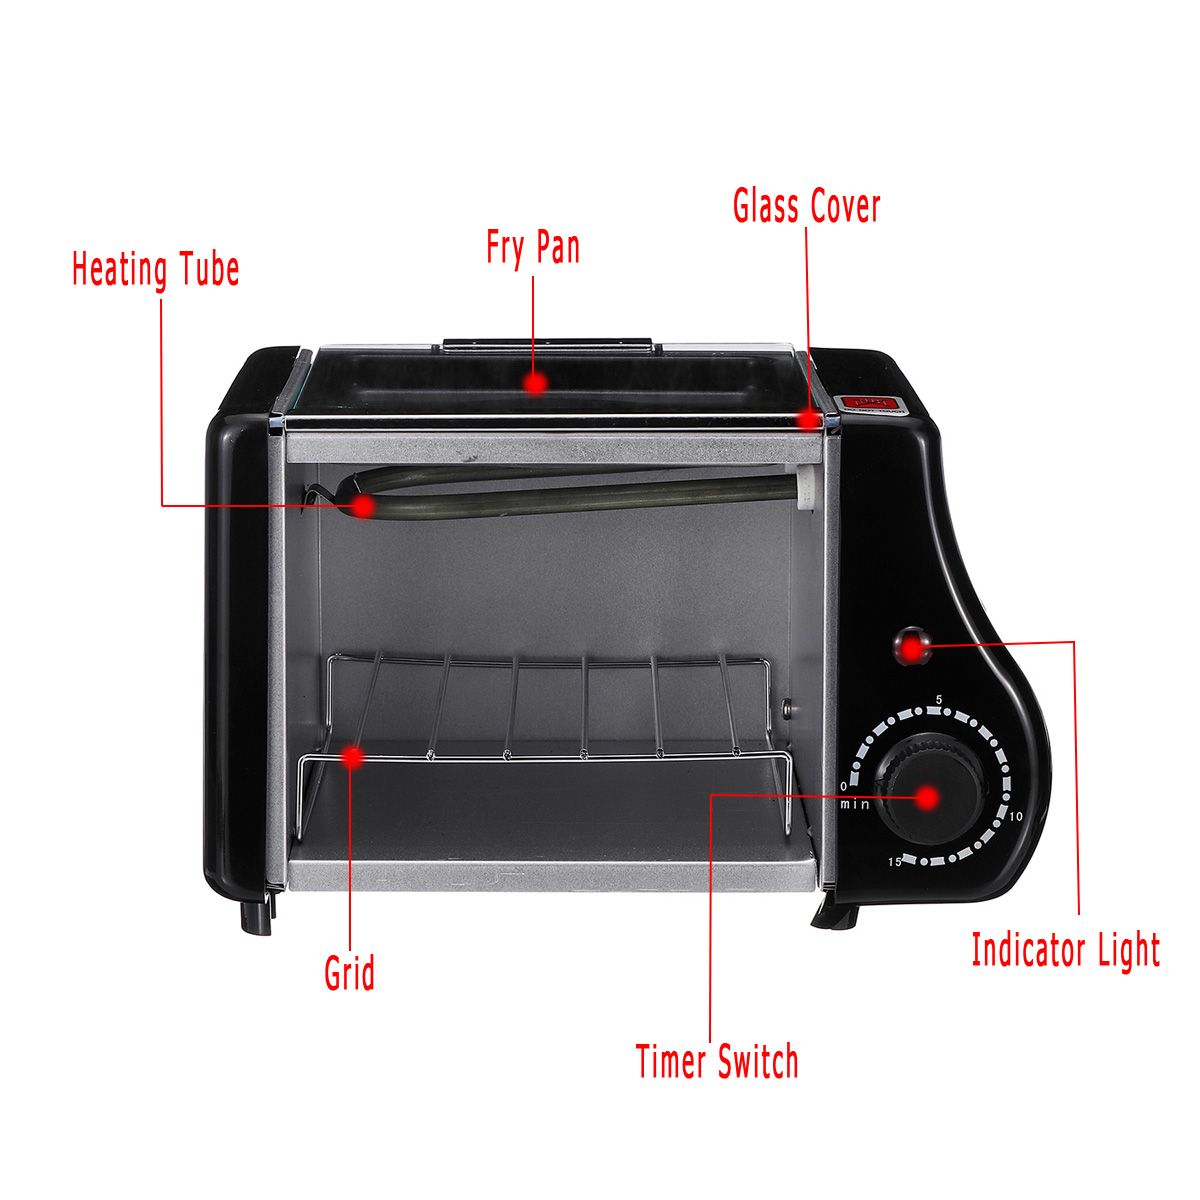 15L-Electric-Mini-Oven-Toaster-Bread-Baking-Frying-Pan-Eggs-Omelette-Kitchen-1536047